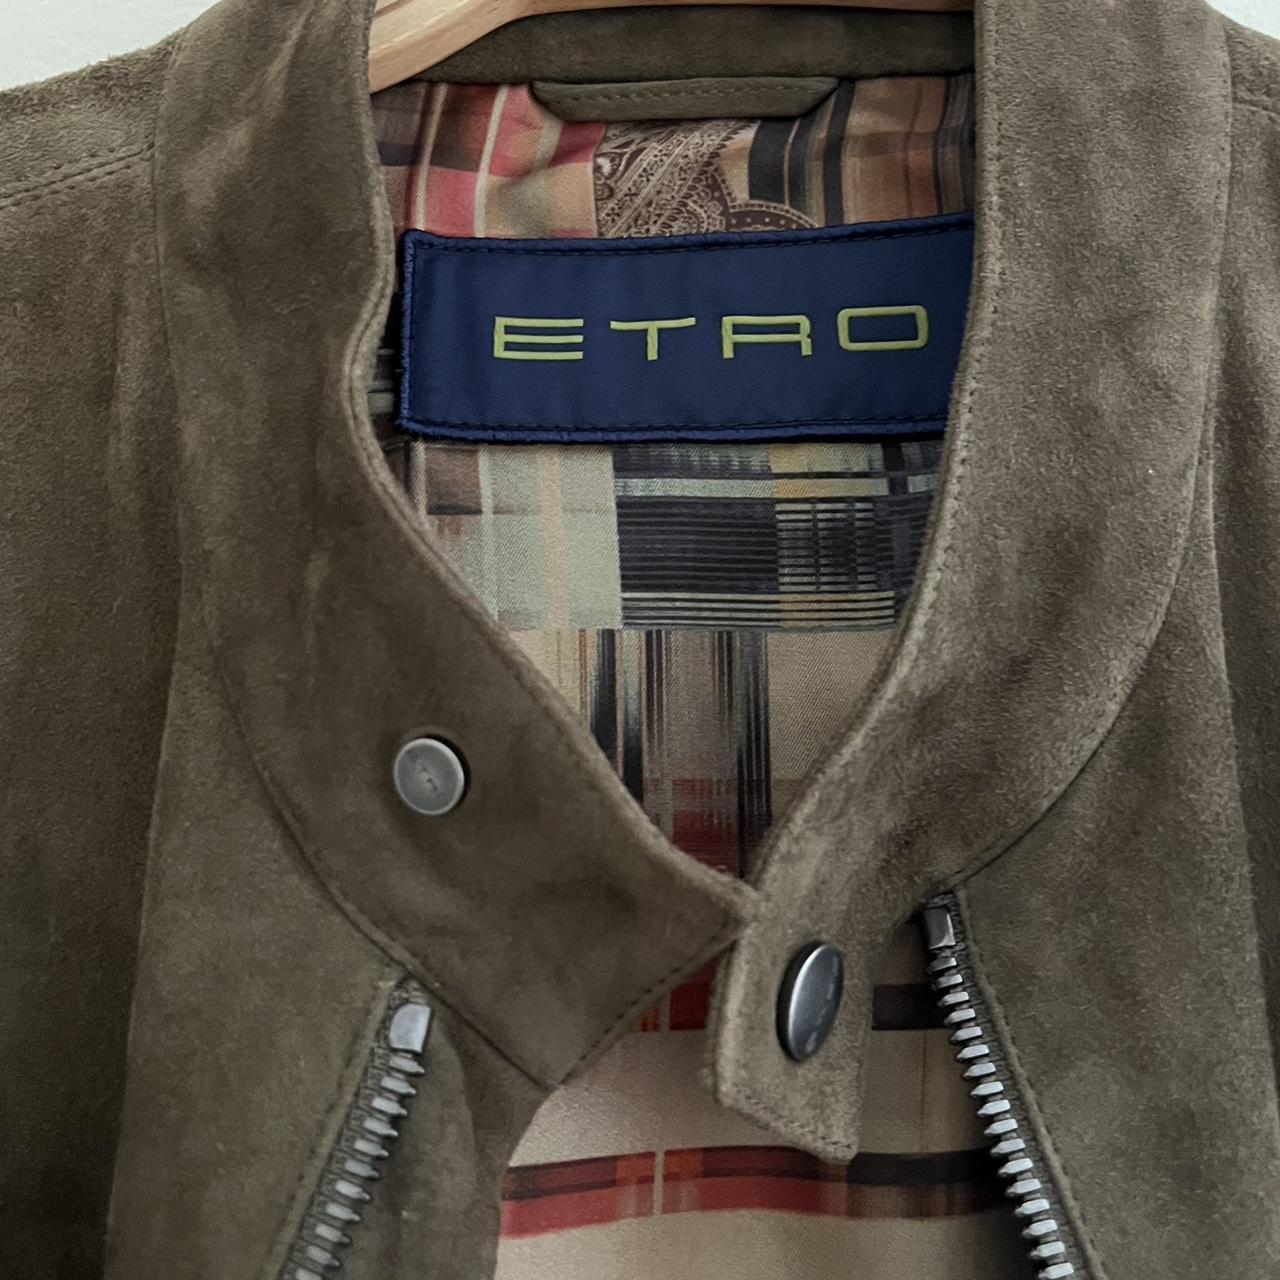 Etro Men's Brown and Red Jacket (2)